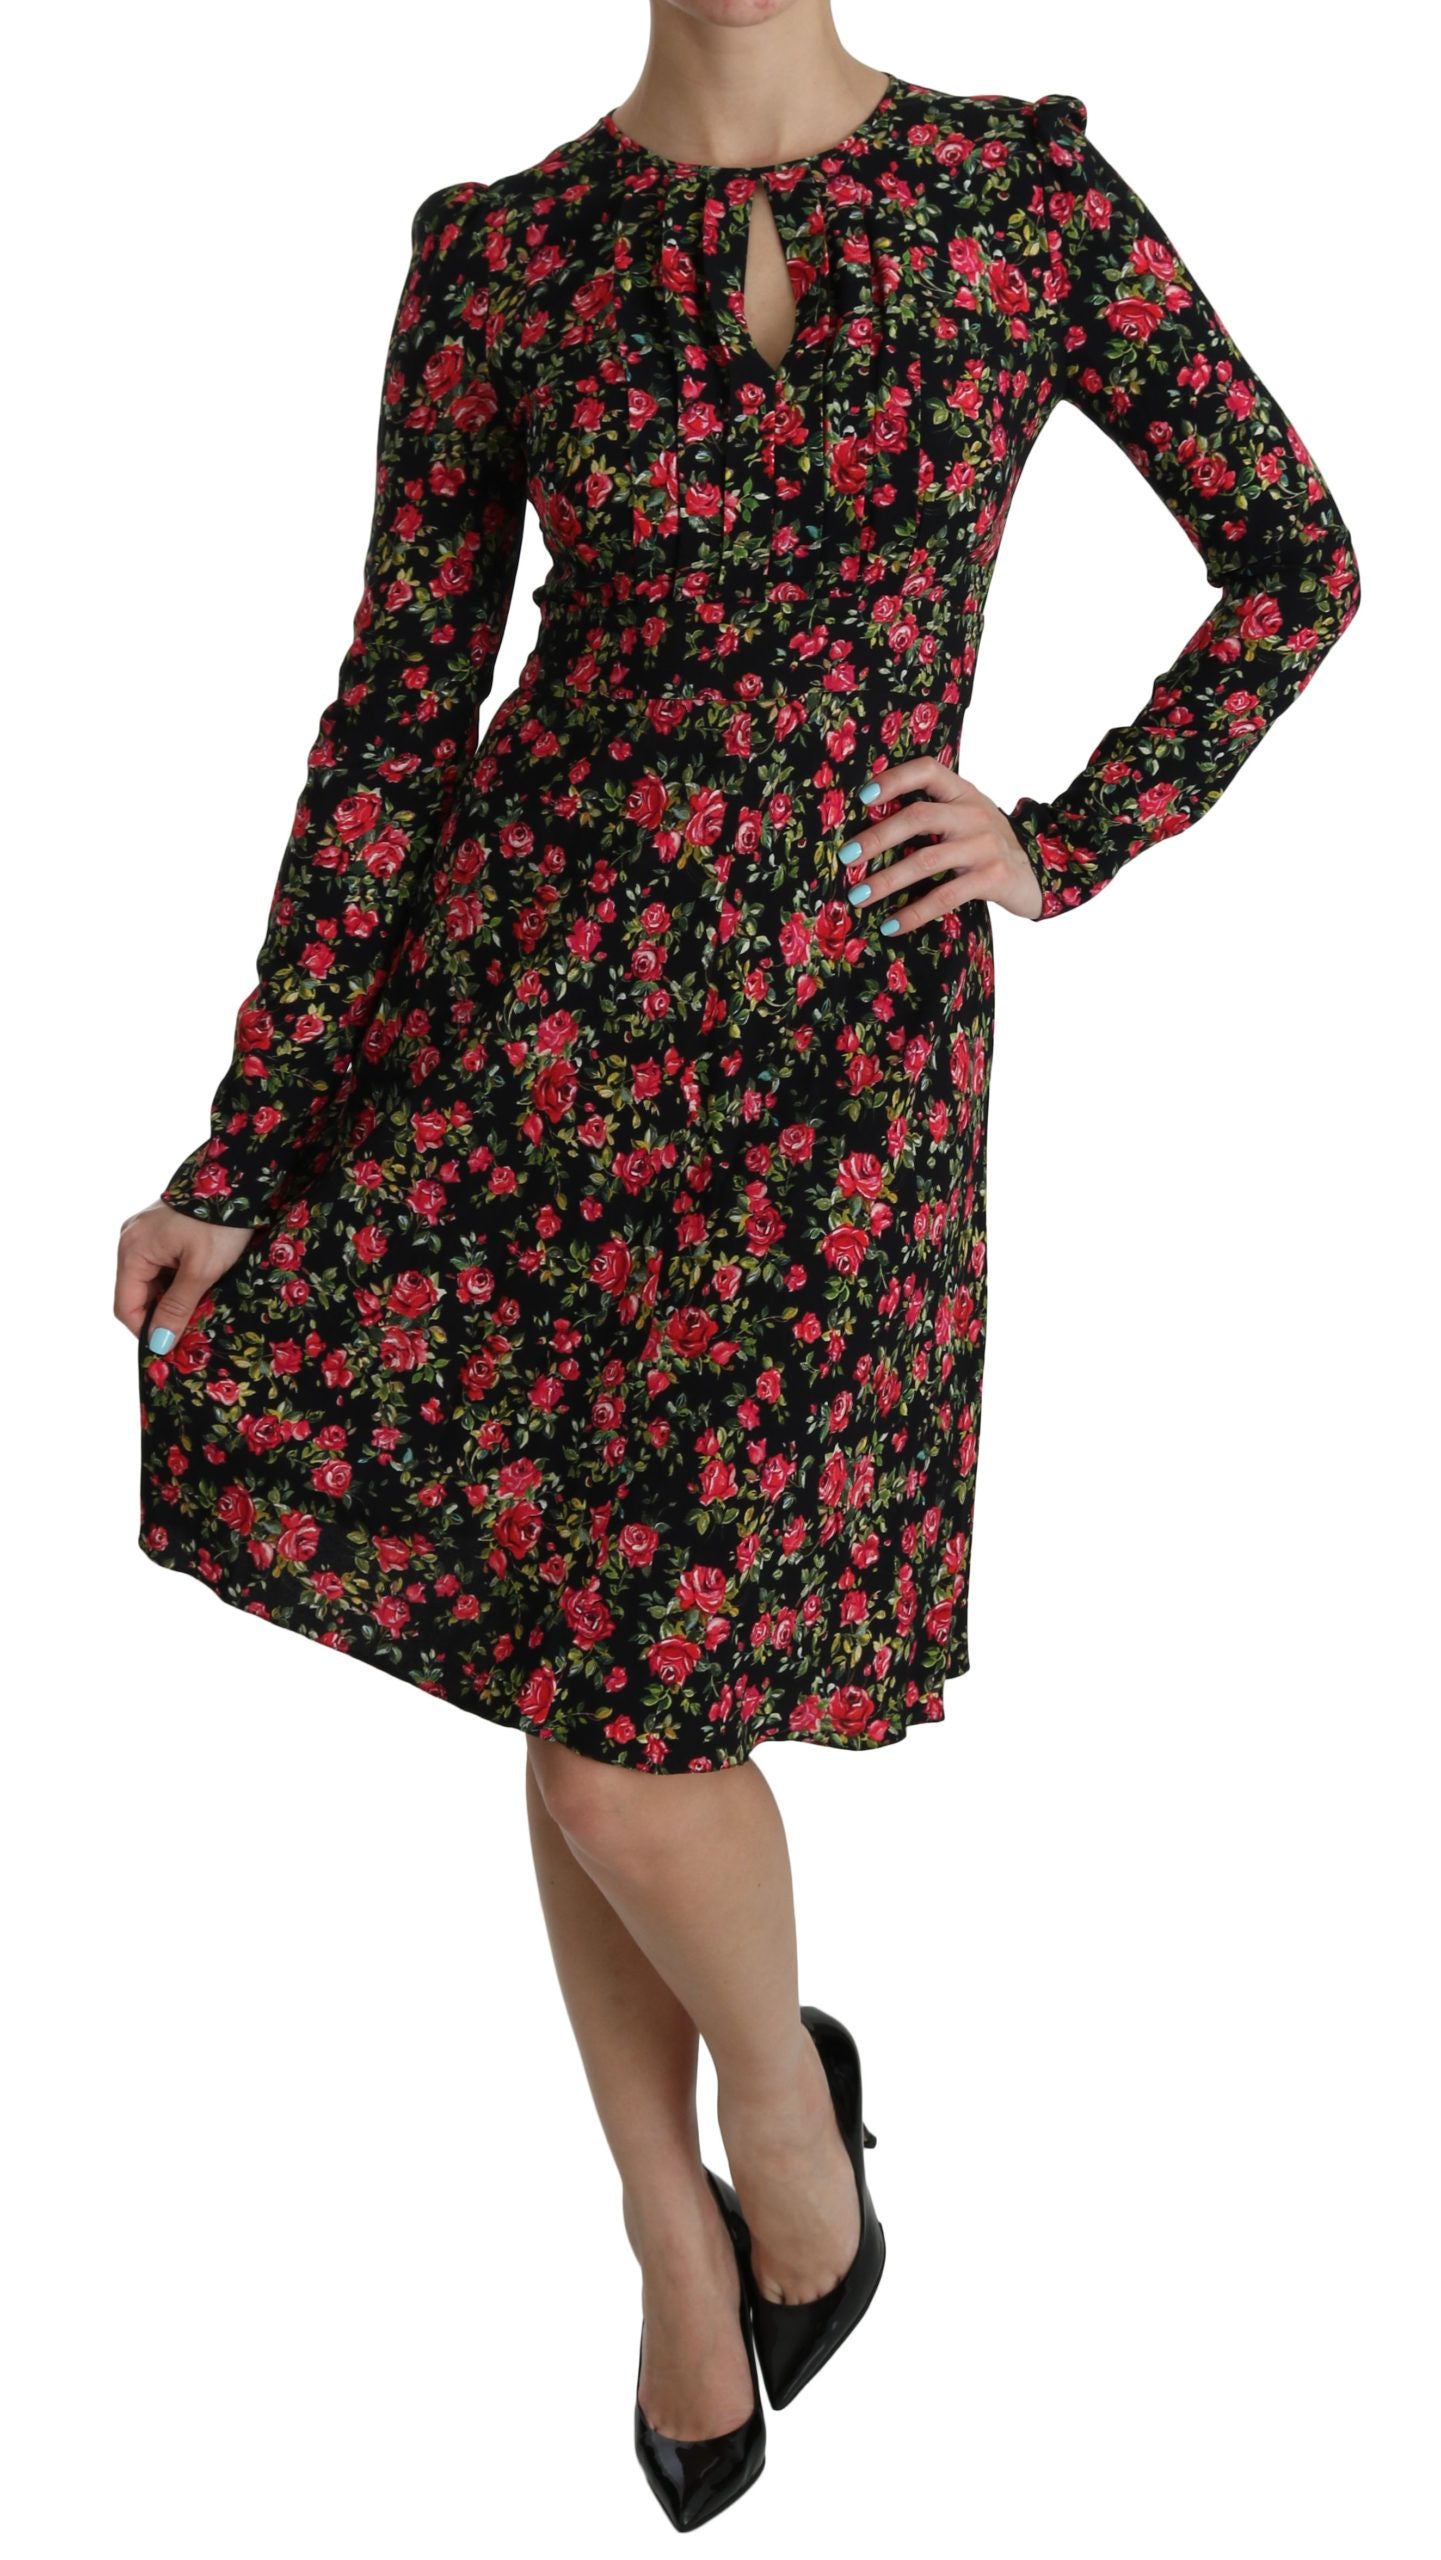 Black Floral Longsleeve Knee Length Dress - Designed by Dolce & Gabbana Available to Buy at a Discounted Price on Moon Behind The Hill Online Designer Discount Store